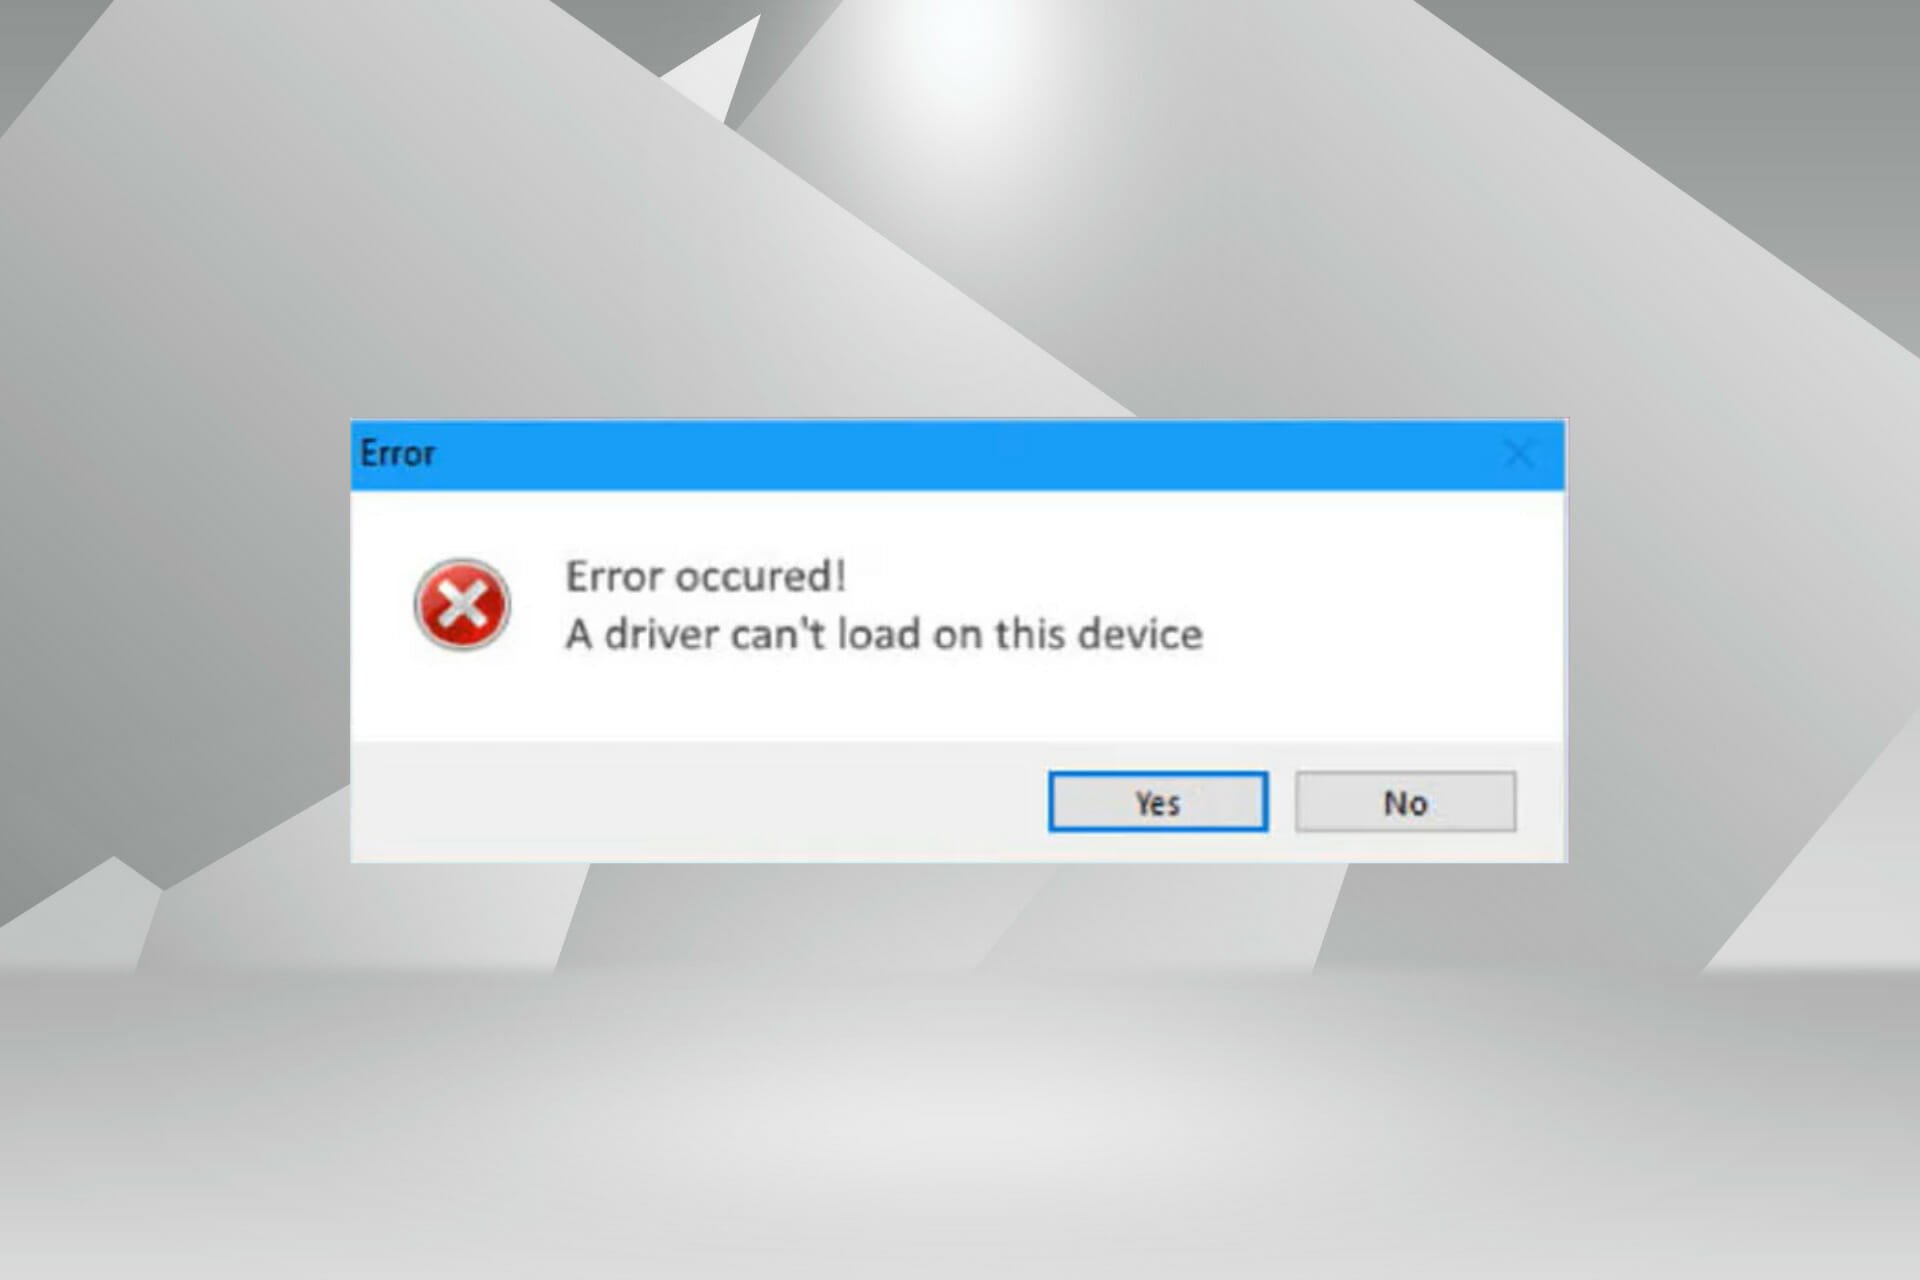 Fix A driver cannot load on this device error in Windows 11